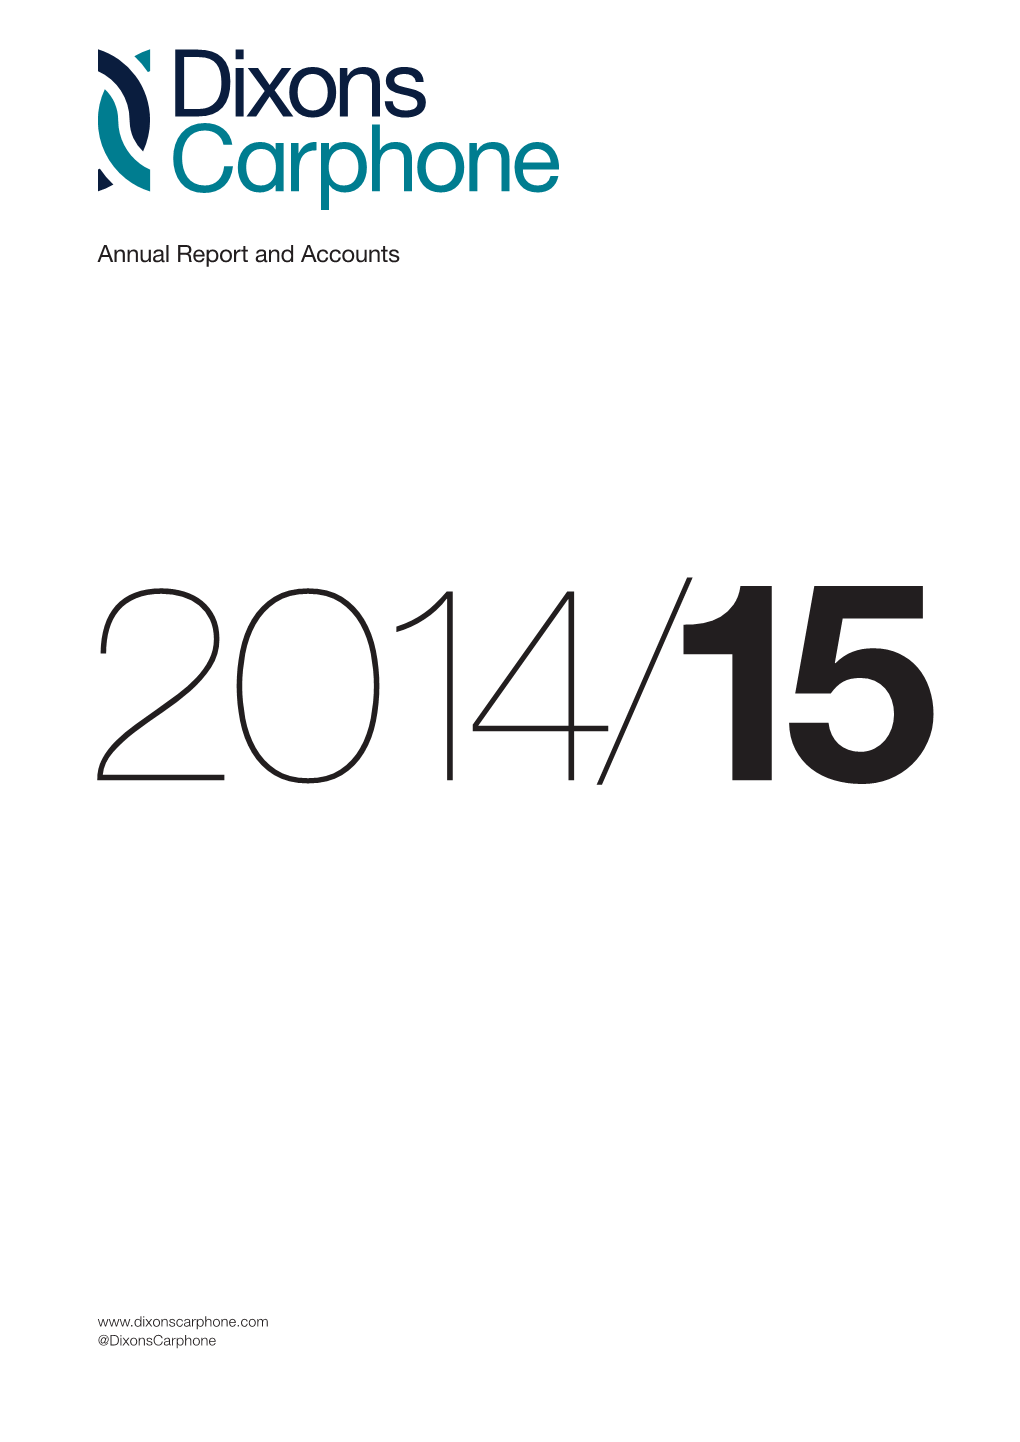 Annual Report and Accounts Annual Report and Accounts and 2014/15 Report Annual 2 014 /15